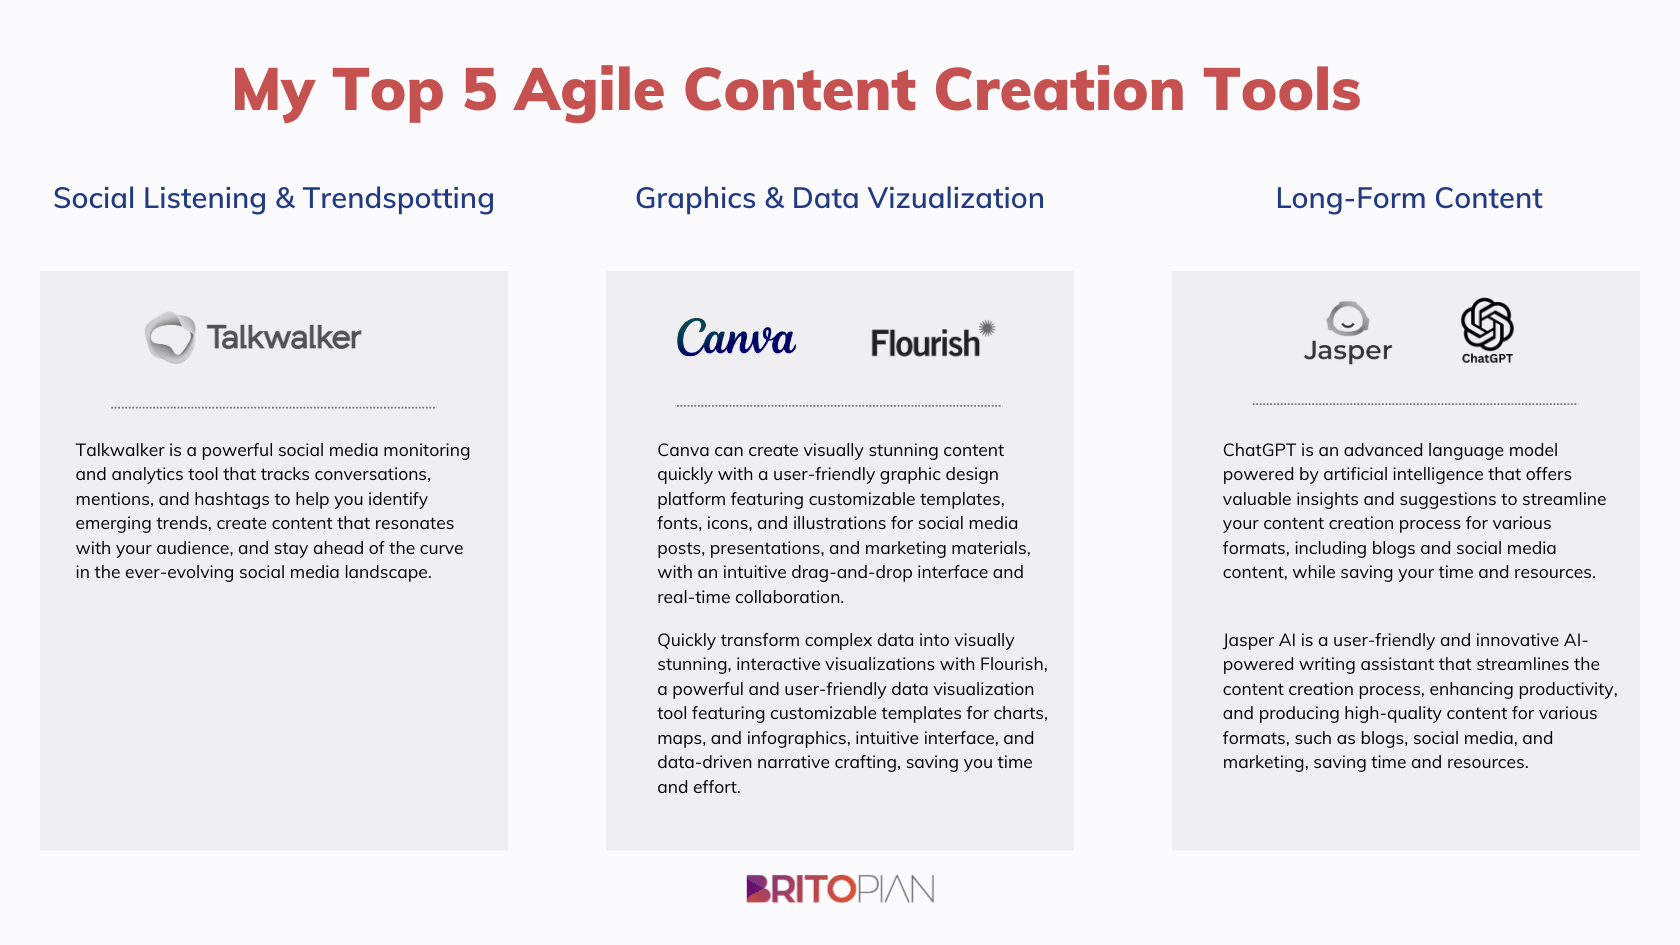 There are hundreds of tools available to agile content creators. To help you get started, my top five are Talkwalker, Canva, Flourish, Jasper AI and ChatGPT.